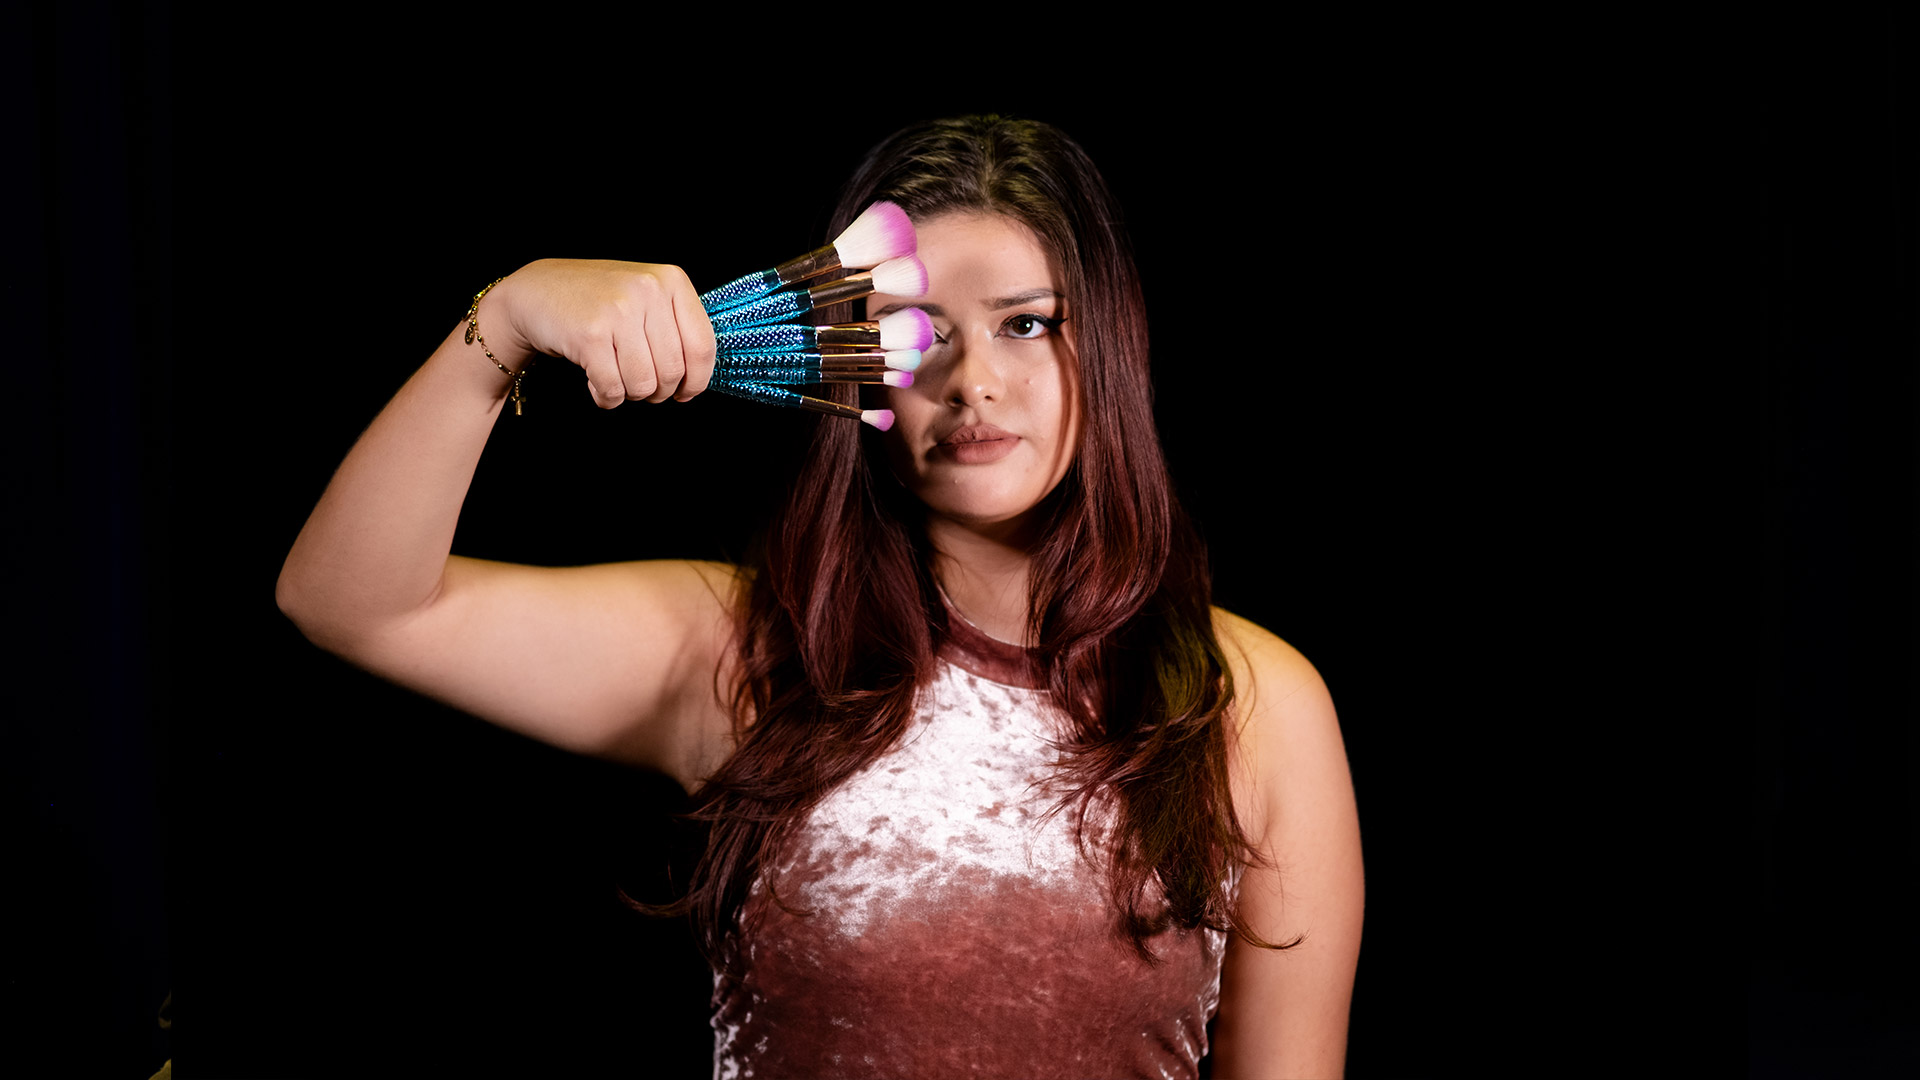 A photo of a young woman holding makeup brushes.